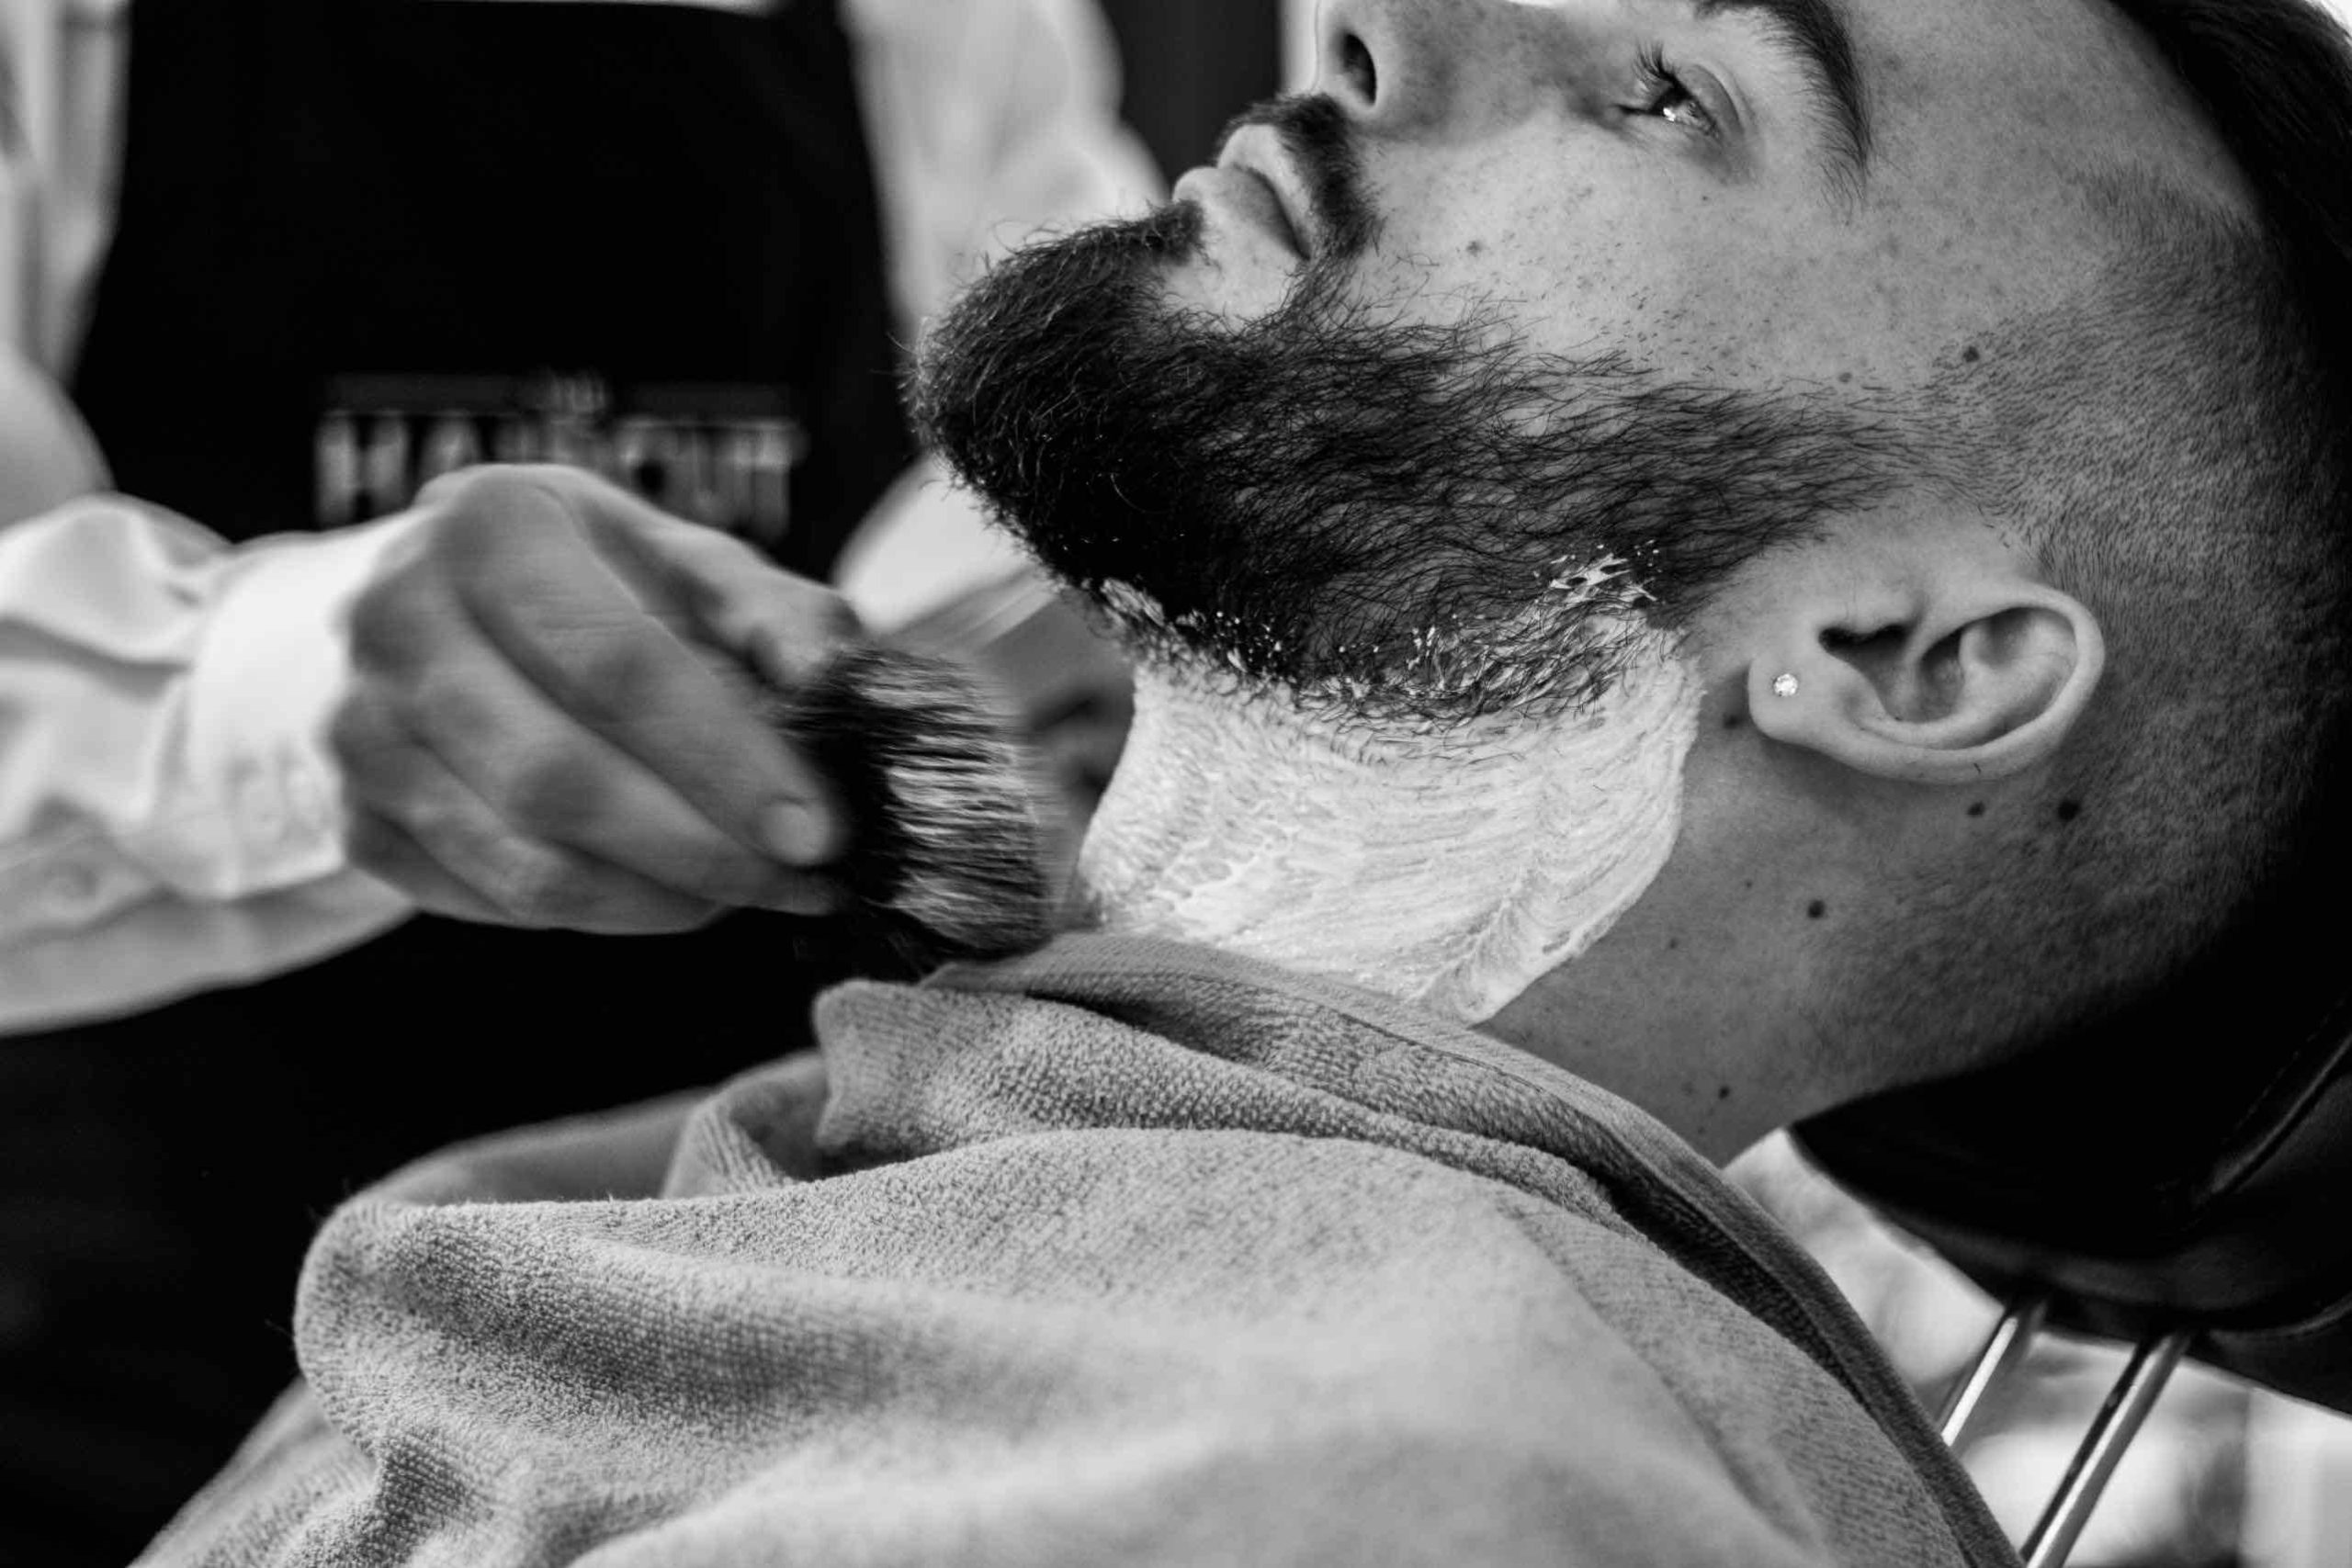 Barber putting shaving foam on a client's face